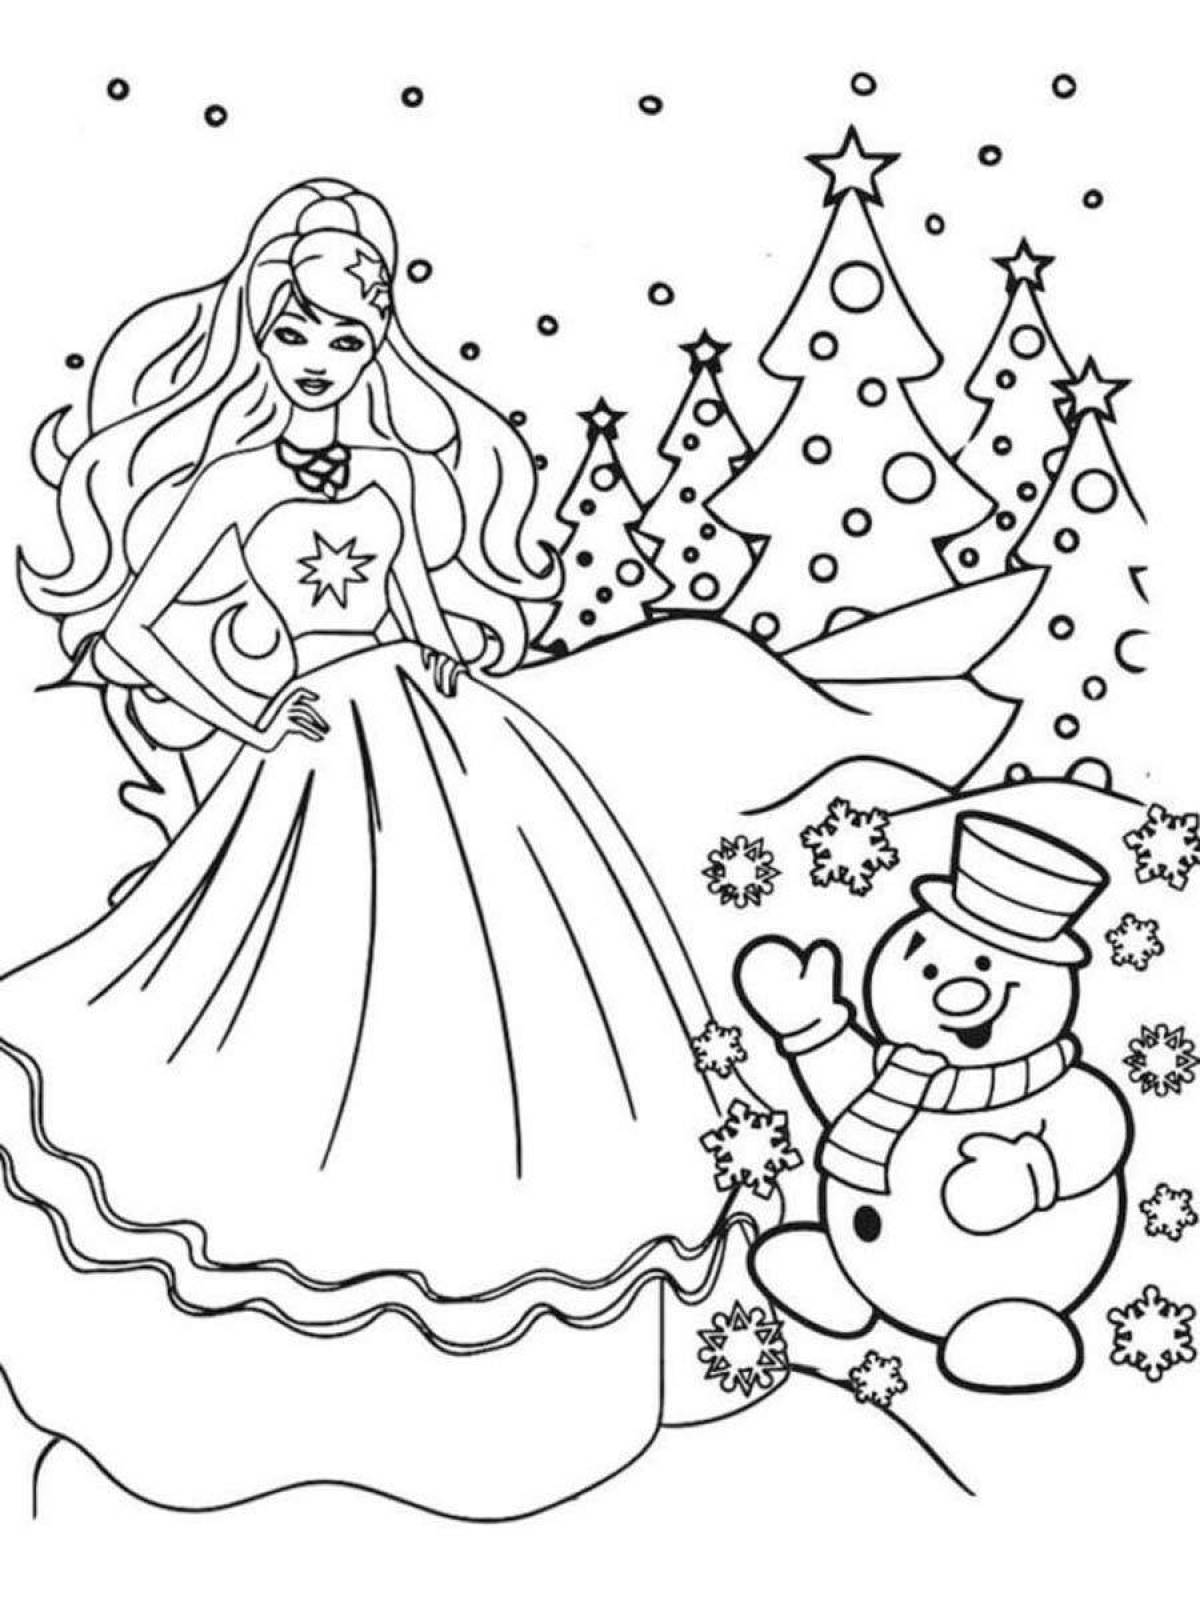 Barbie colorful Christmas coloring book